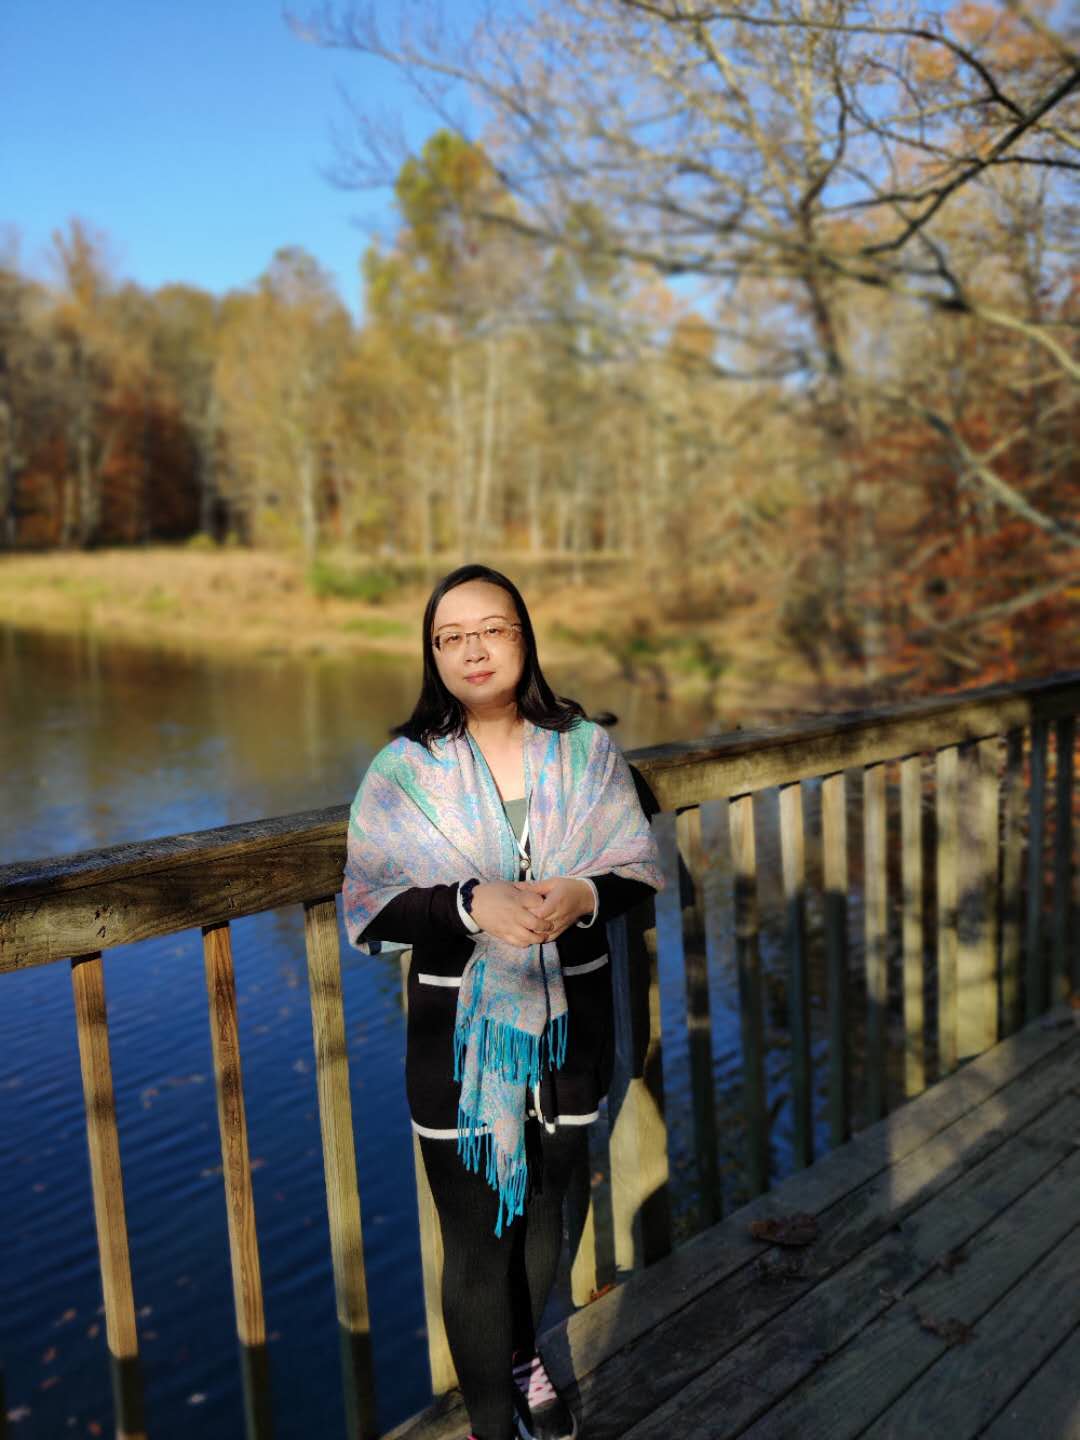 A woman leaning against the rail of a bridge with woods, a lake, and blue sky as the background